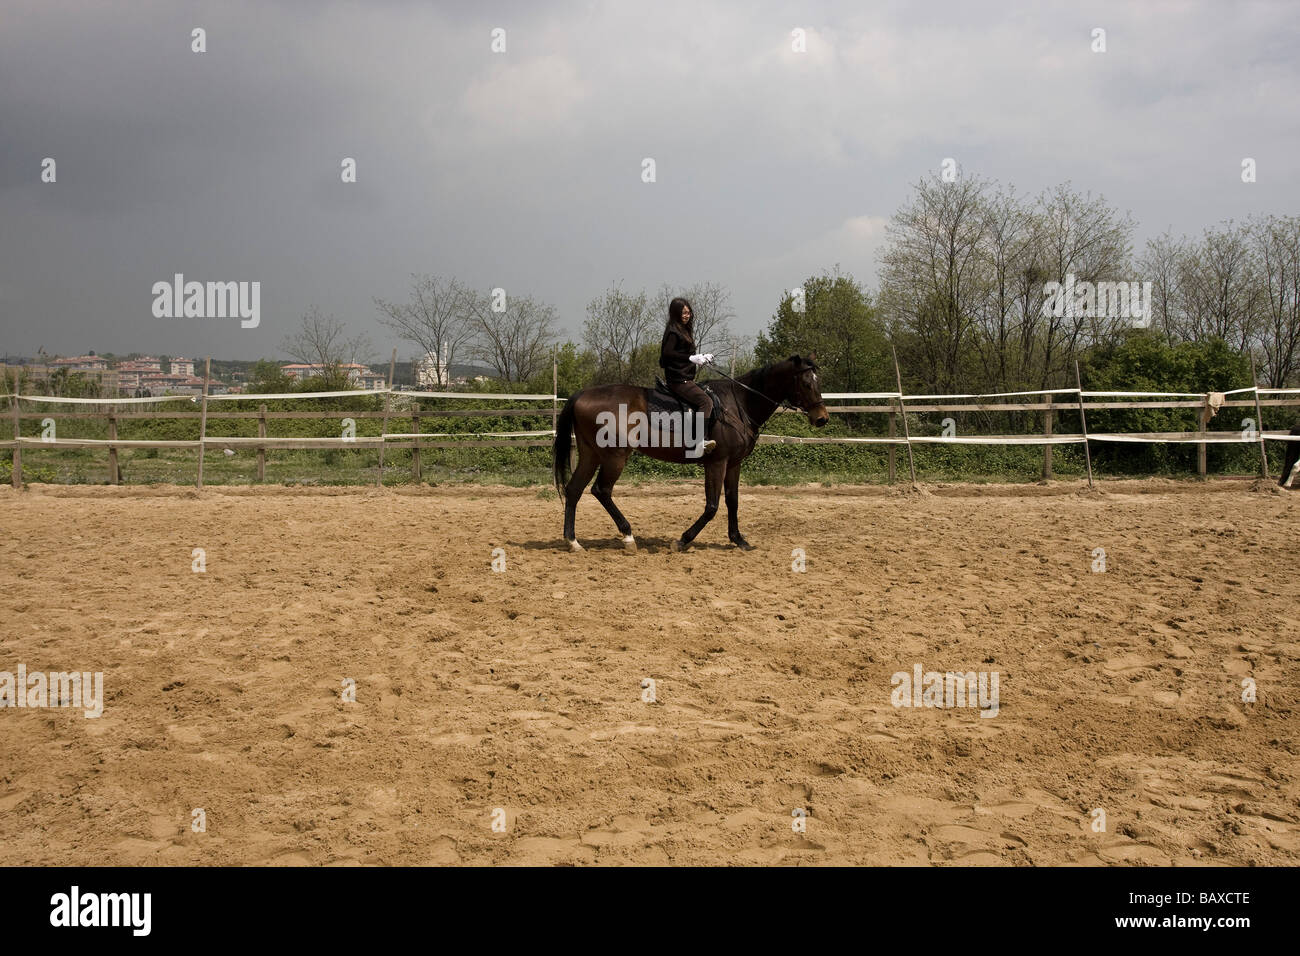 a girl is riding a horse at the maneage Stock Photo